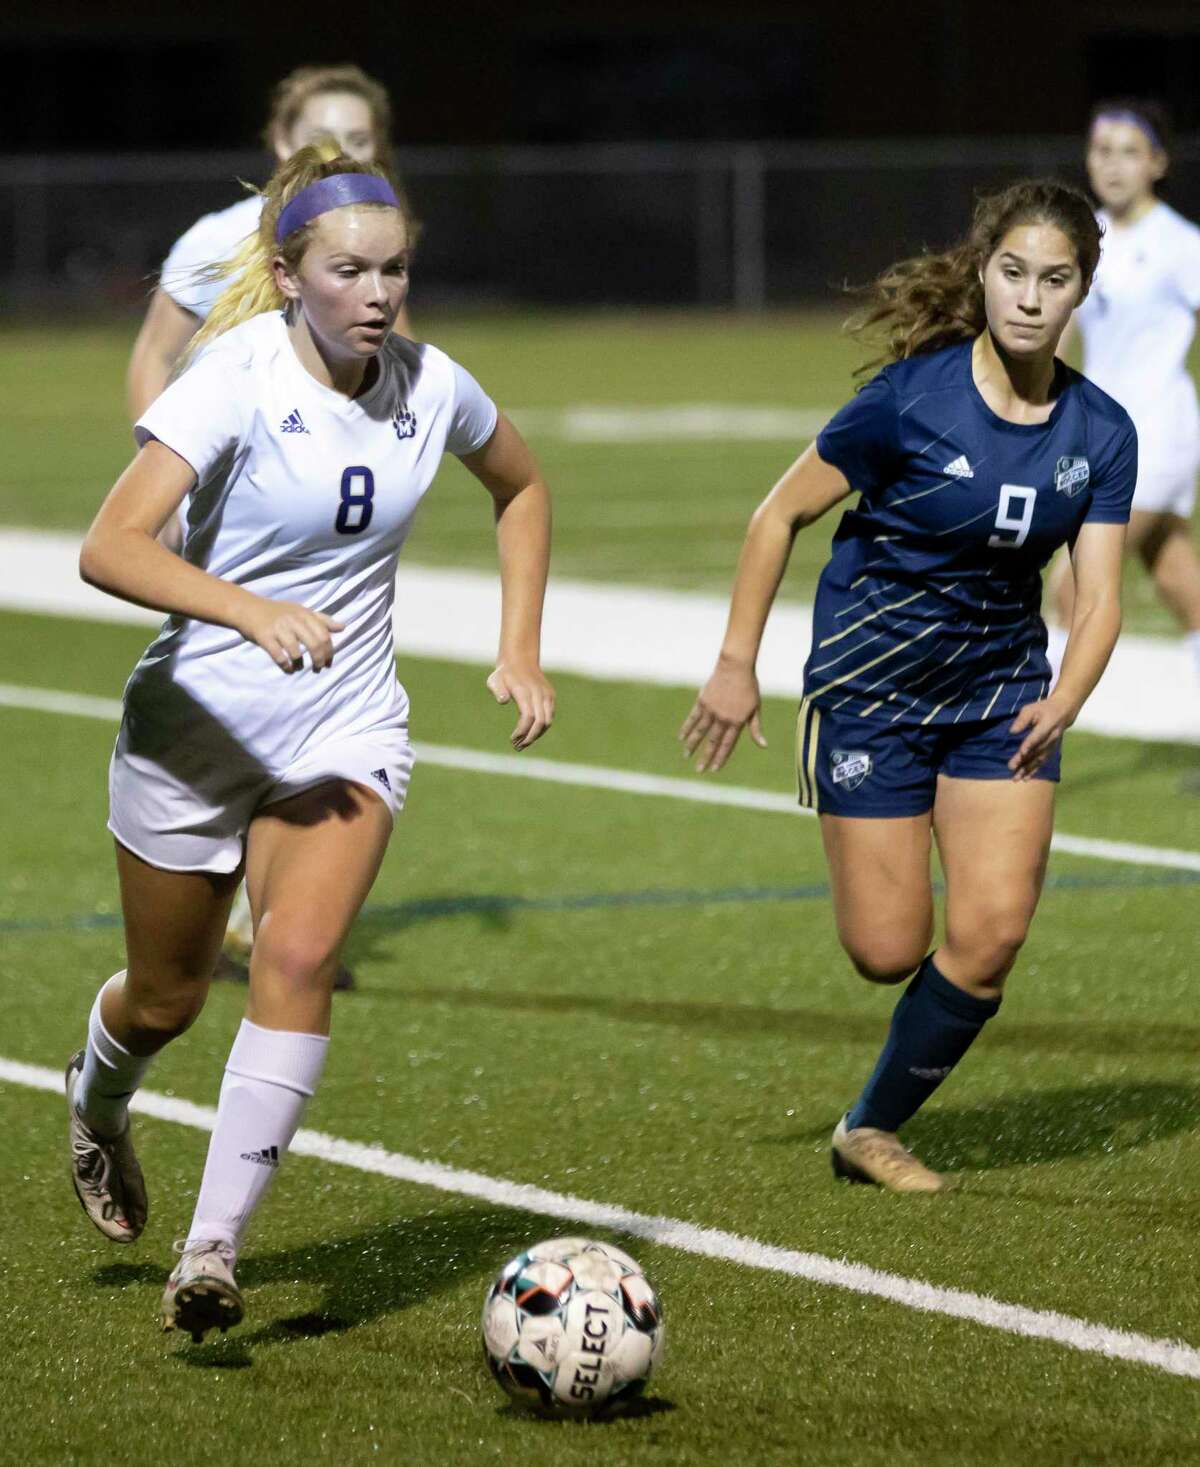 Montgomery midfielder Mable Pruter (8) drives the ball after intercepting a pass to Lake Creek Isabella Ibanez (9) during the first half of a District 20-5A girls soccer game at Lake Creek High School, Friday, Feb. 26, 2021, in Montgomery.